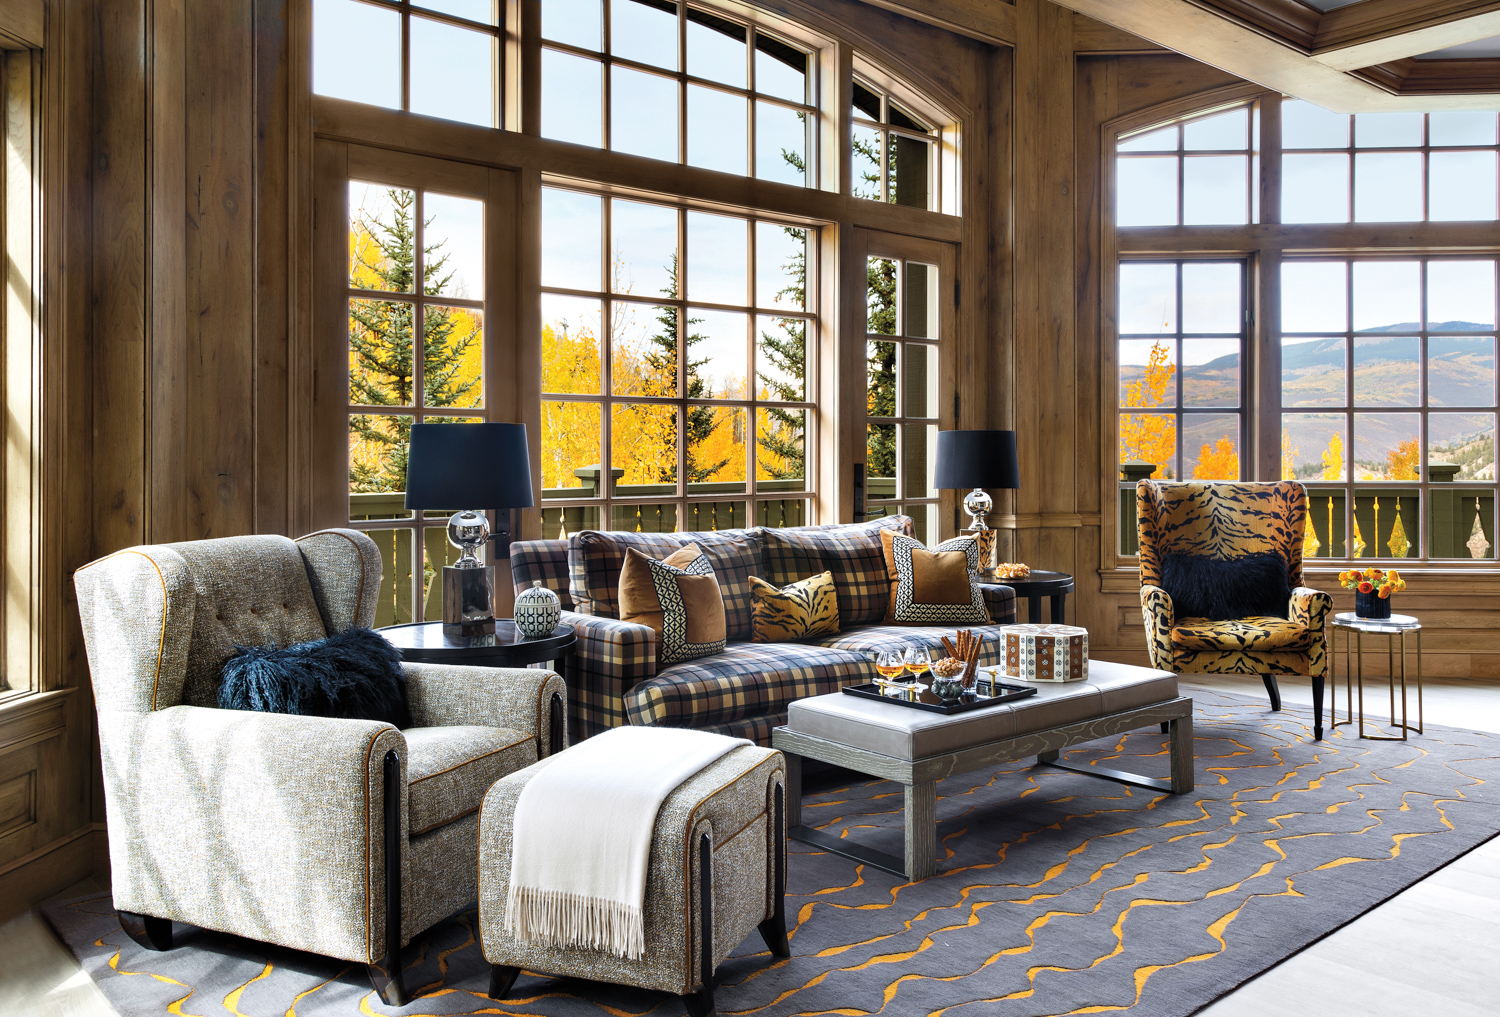 Living room with butternut-wood walls, panoramic views of fall foliage and armchairs and sofa in varied patterns